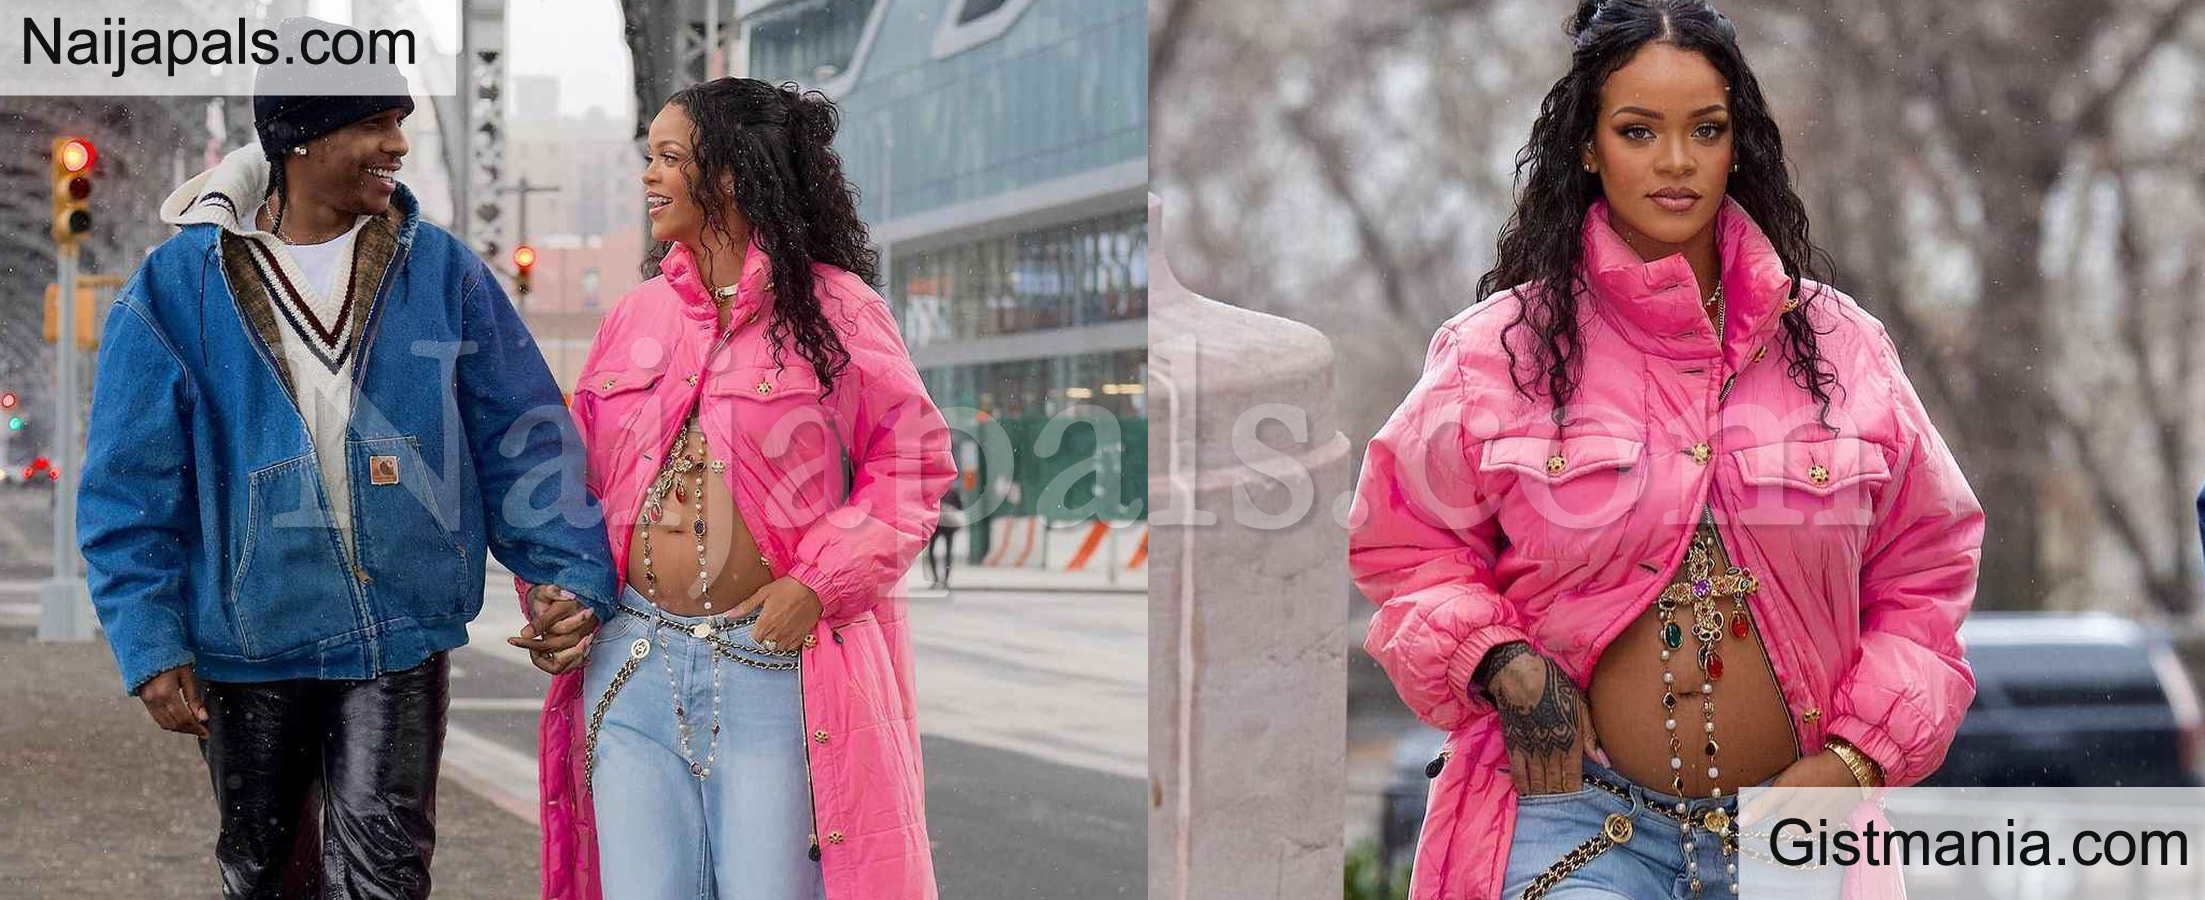 Rihanna is pregnant, debuts baby bump on stroll with A$AP Rocky